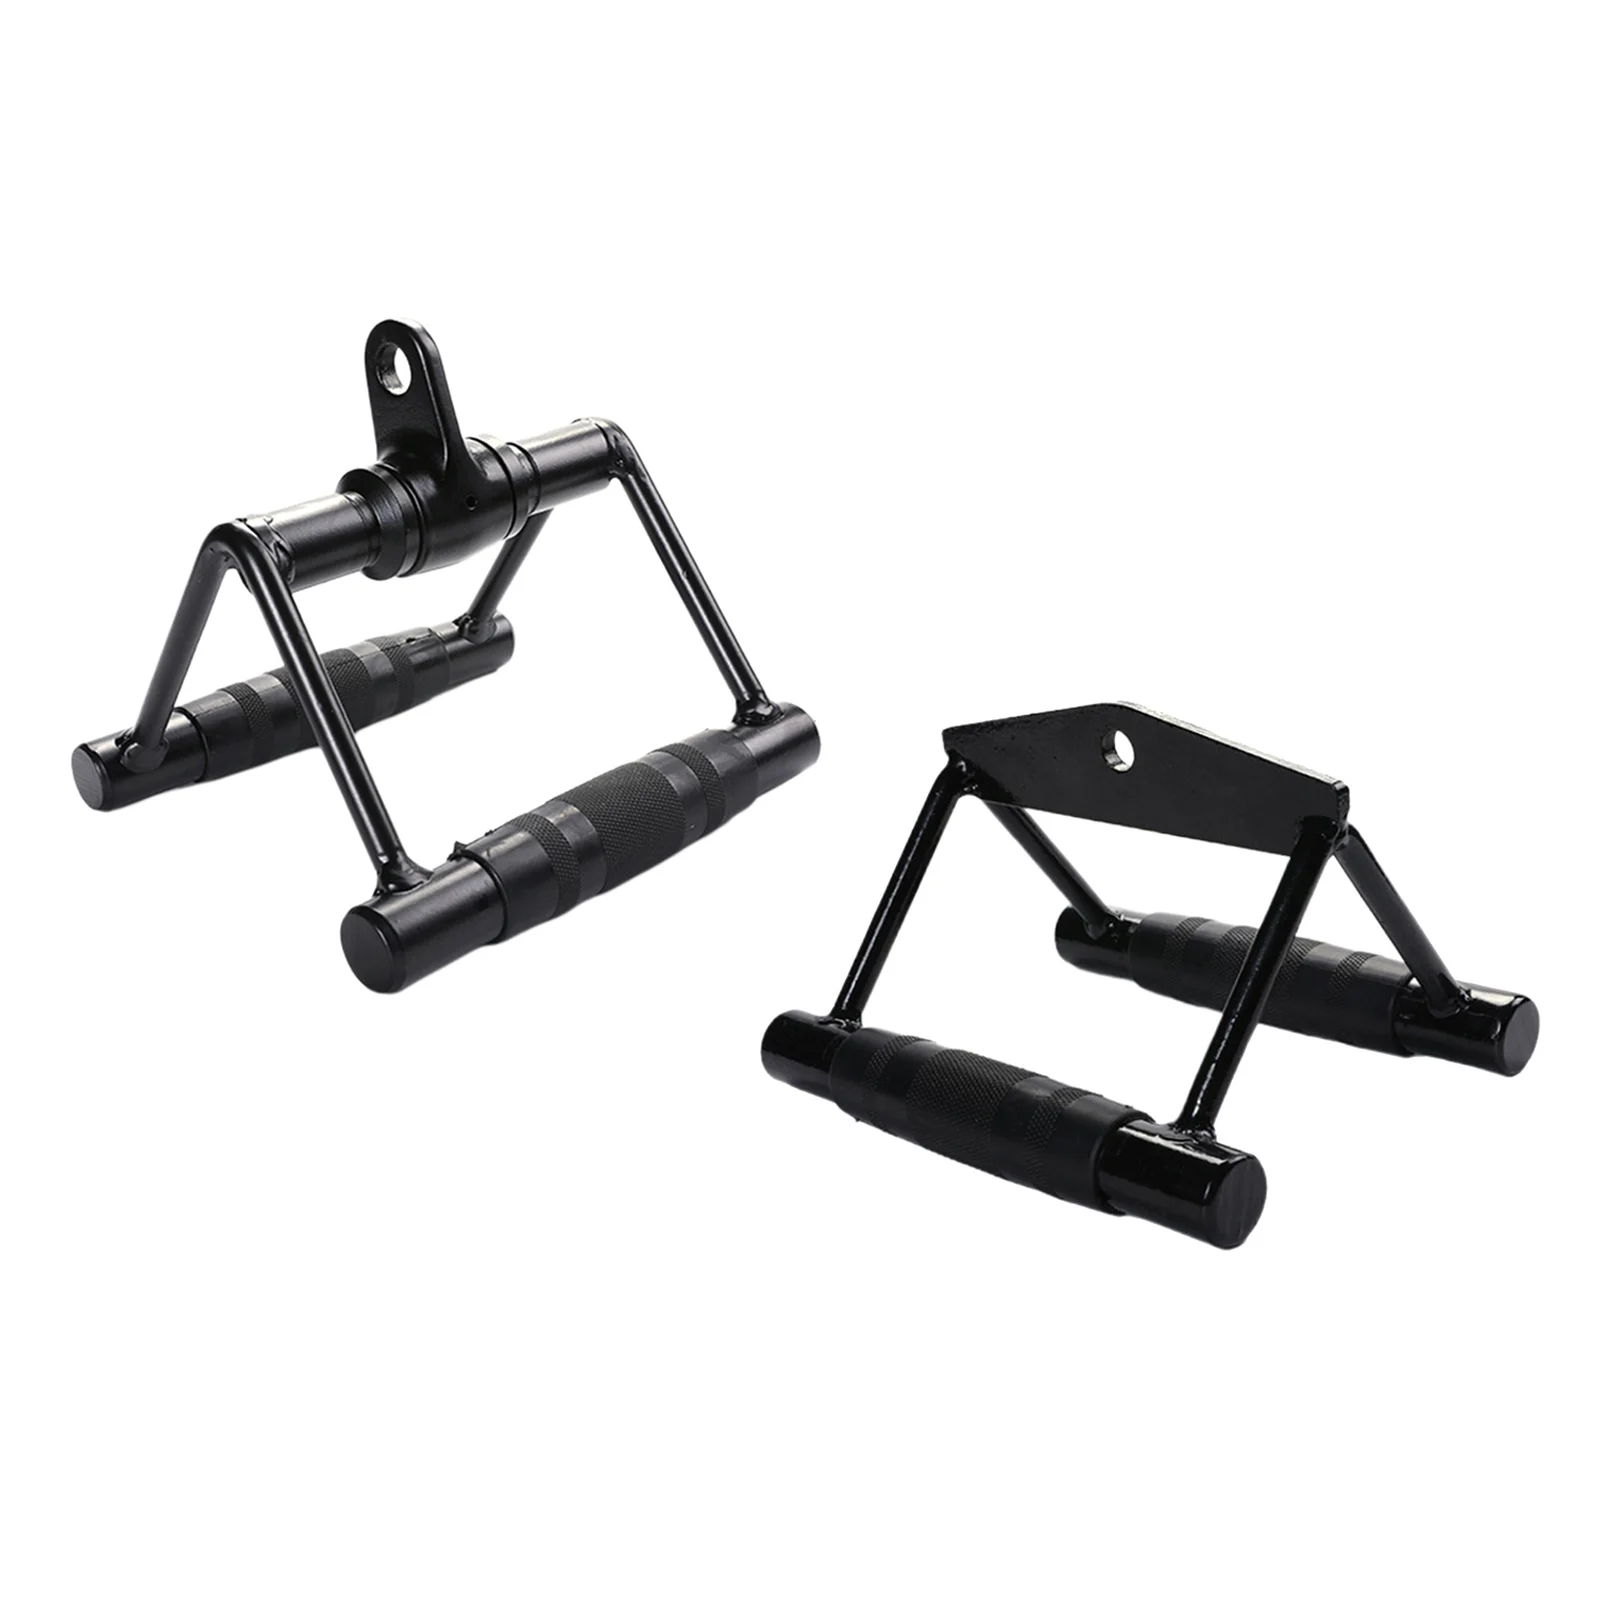 Double D Row Handle Cable Machine Attachment for Gym, V Bar Cable Attachment? Non Slip Handle & 360 Steel Swivel